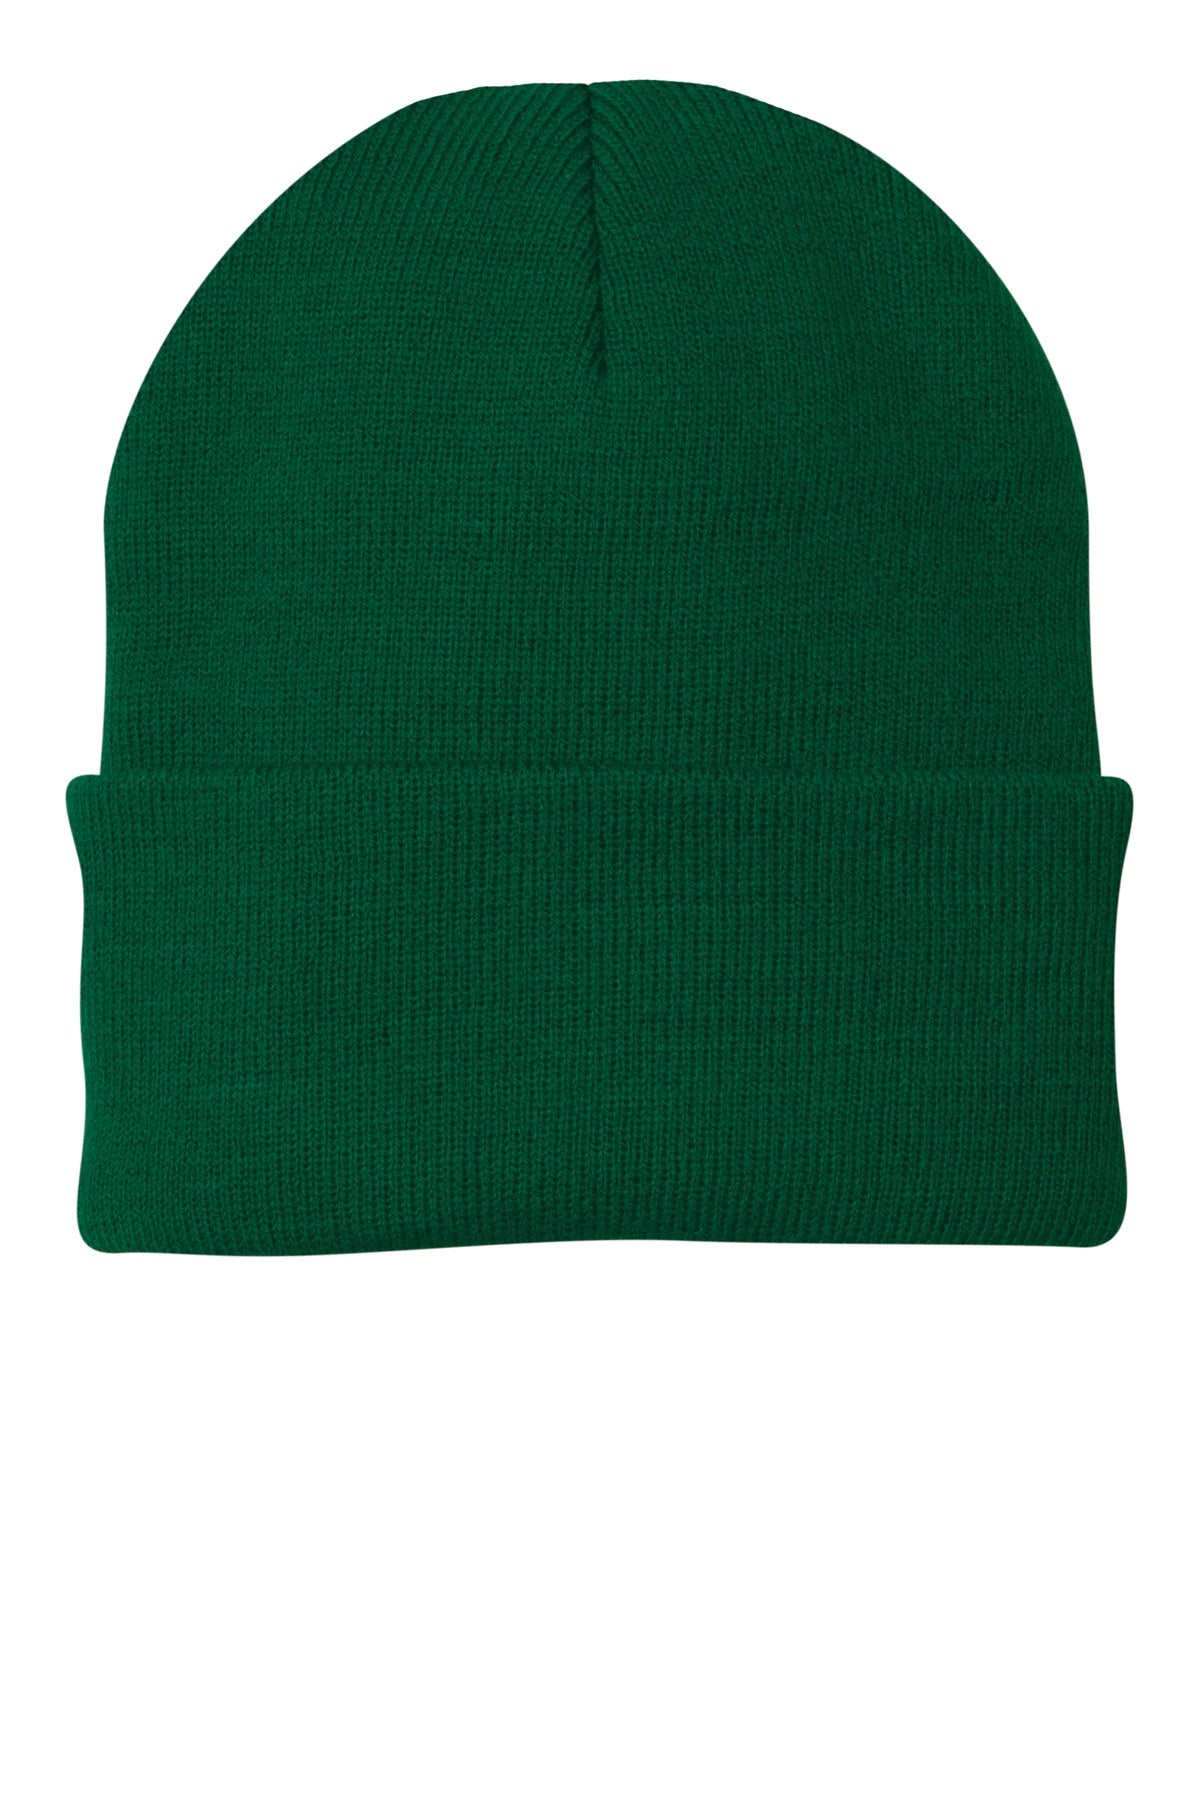 Port & Company Knit Cap. CP90 - Athletic Green